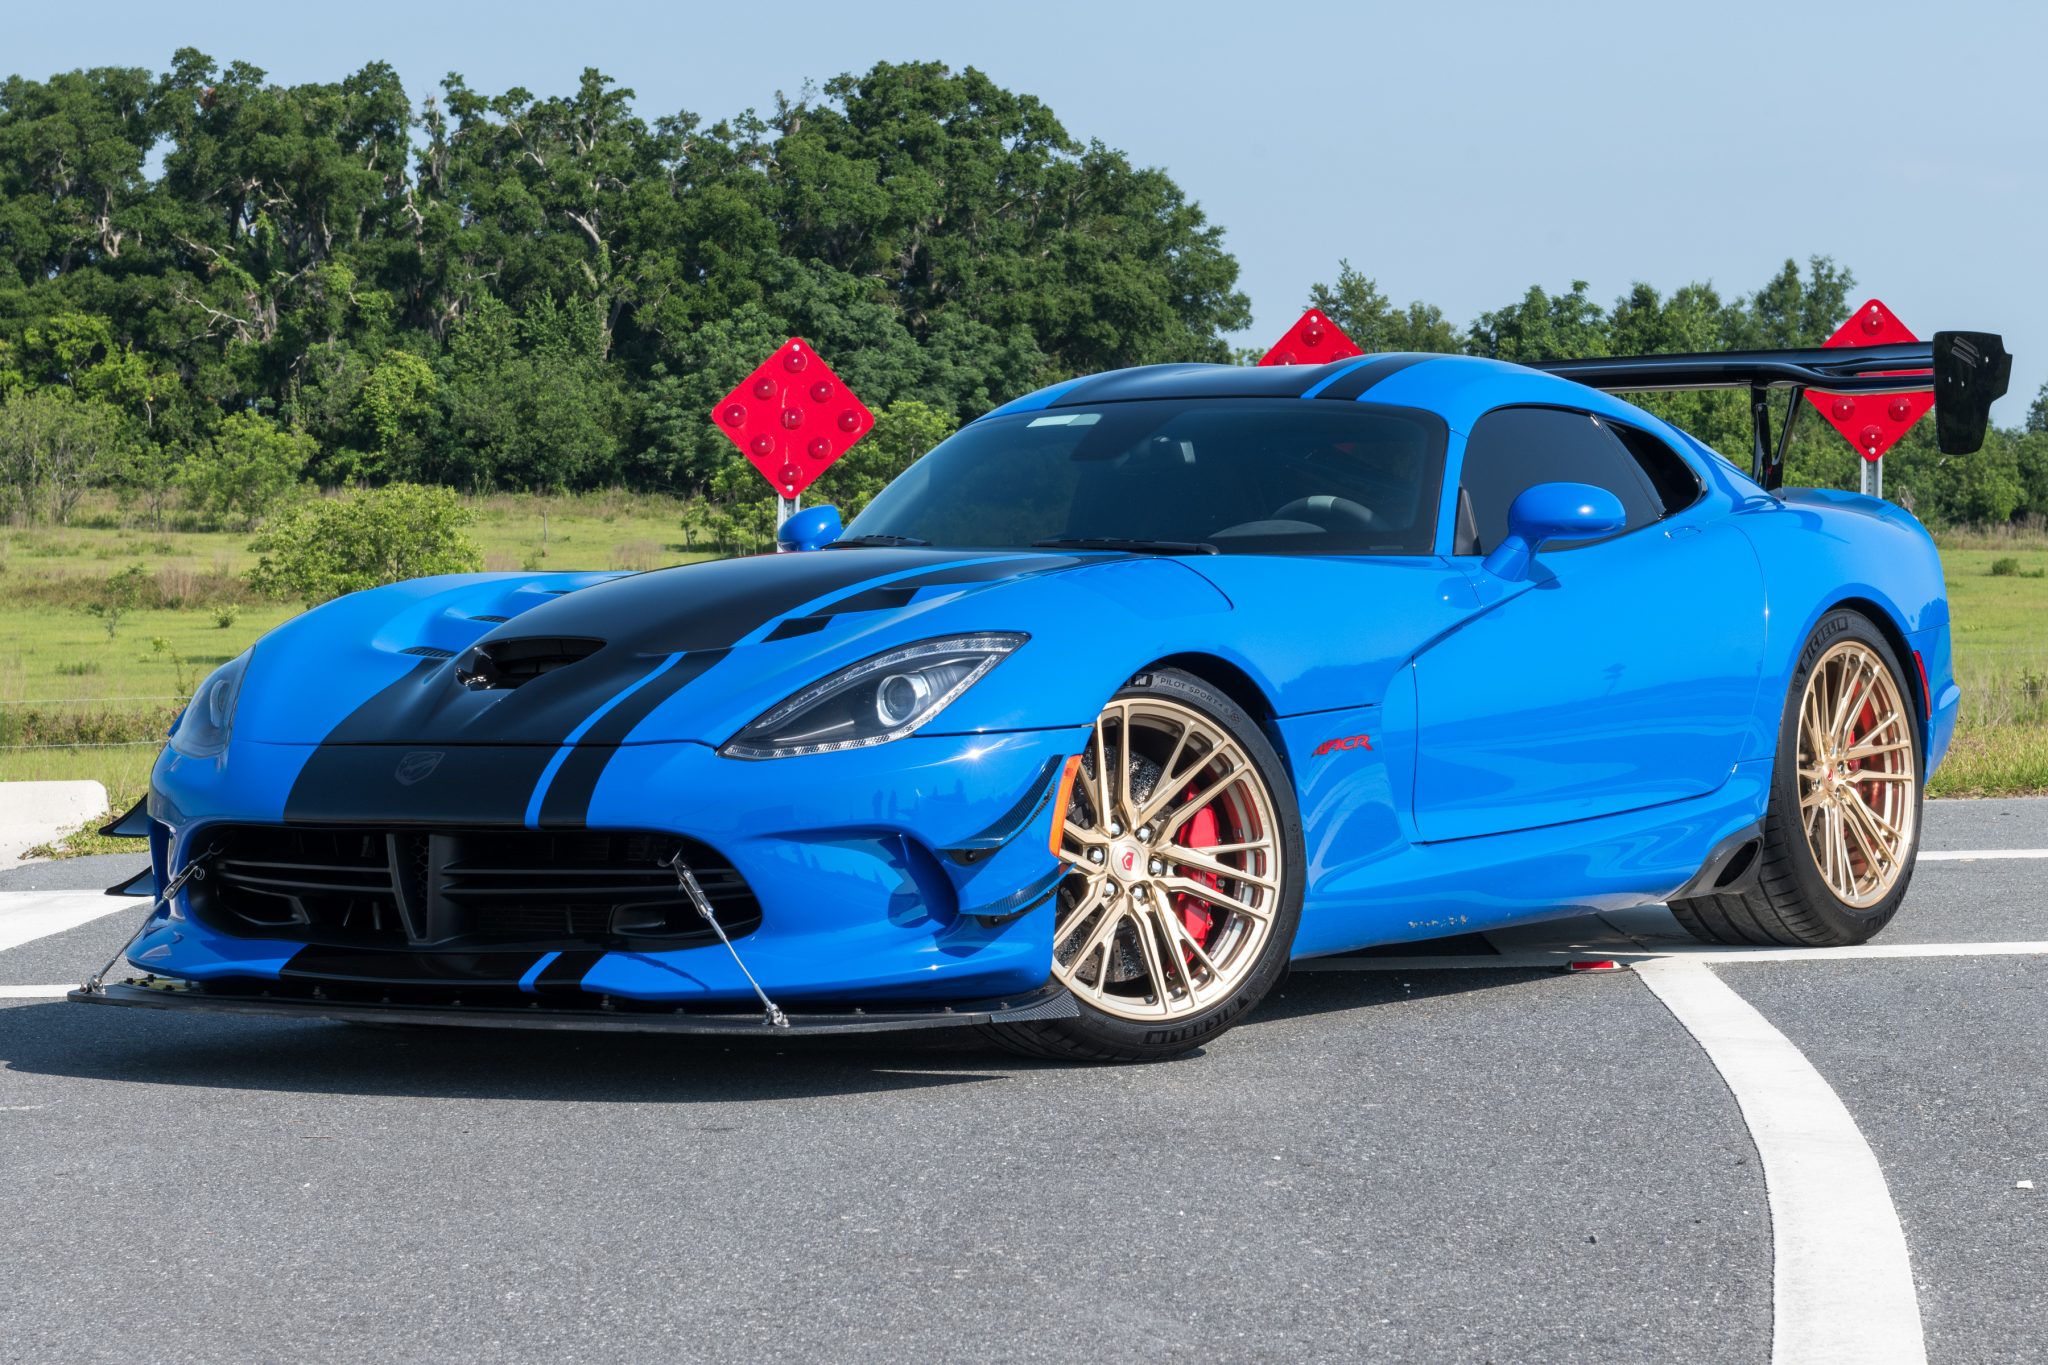 Used 2016 Dodge Viper ACR Extreme Review